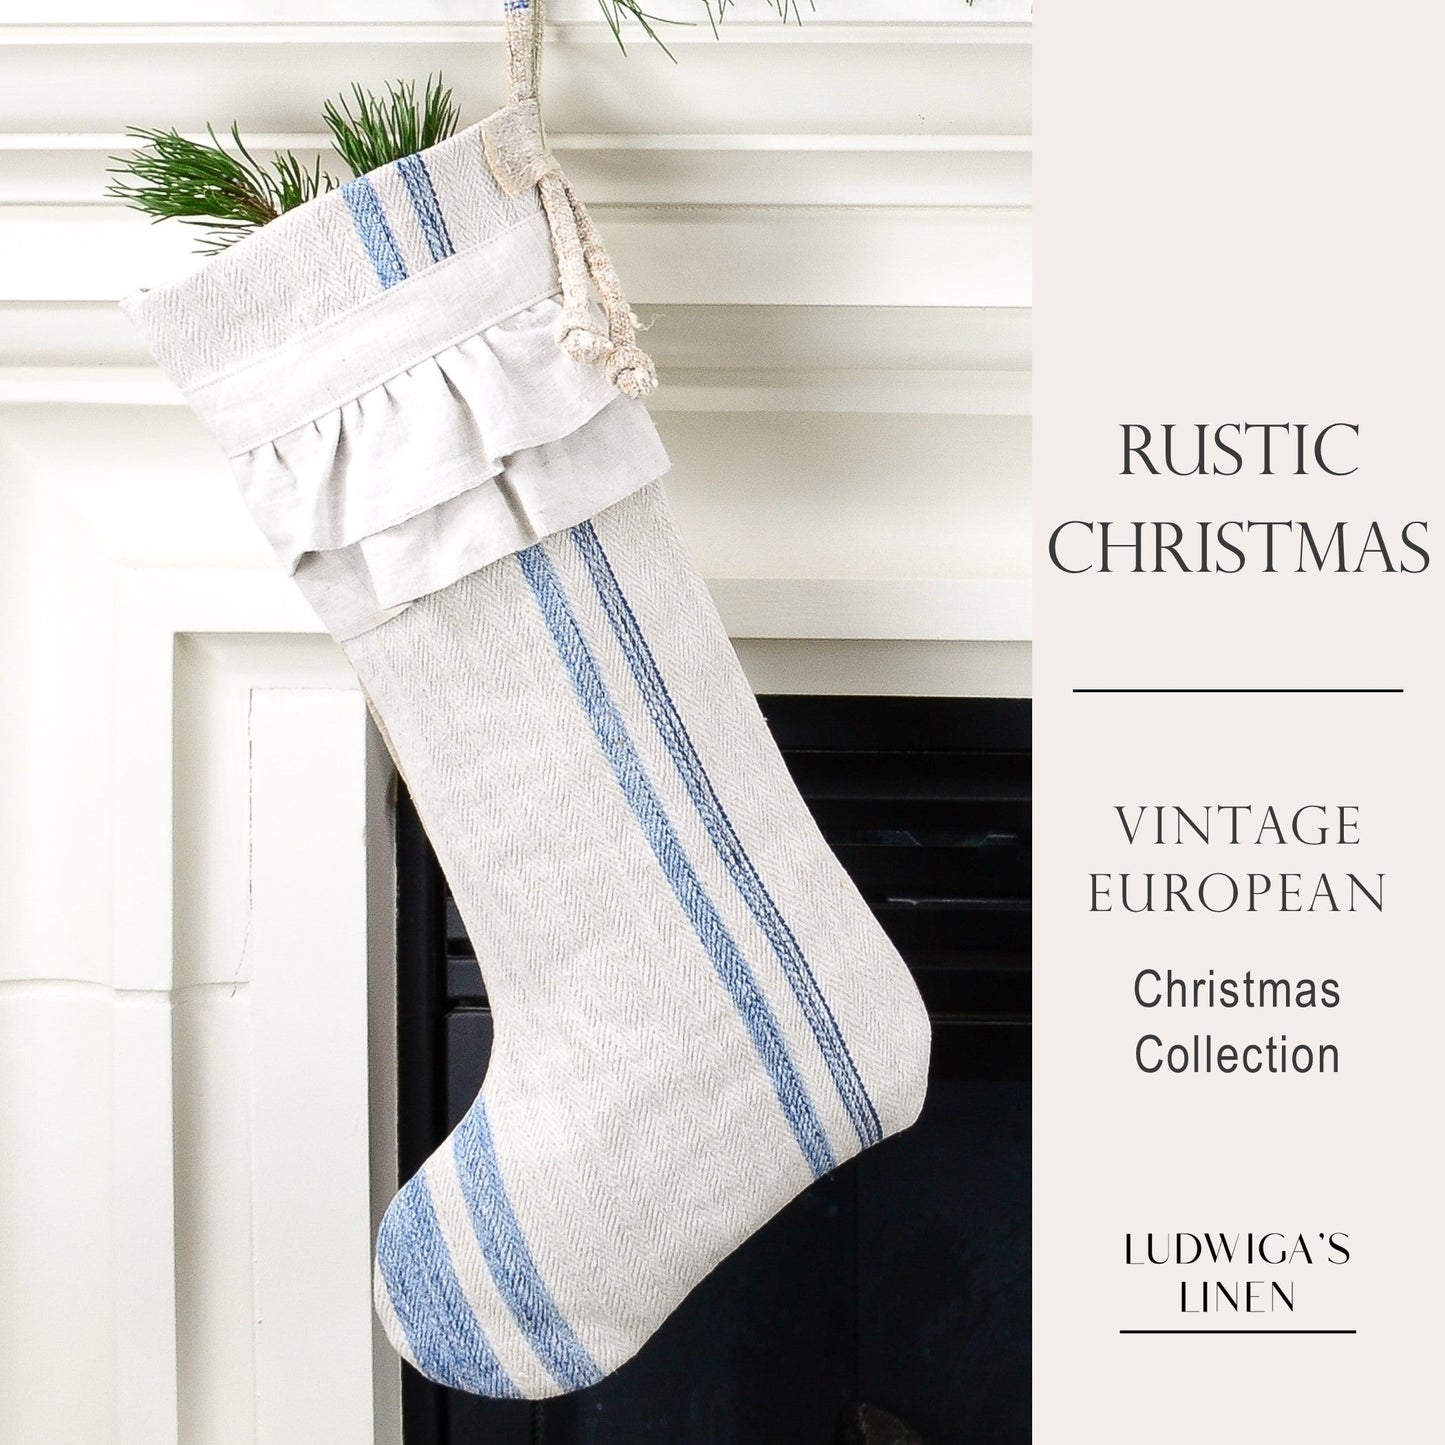 Antique German Grain Sack Linen Christmas Stocking - perfect for holding lots of Christmas surprises